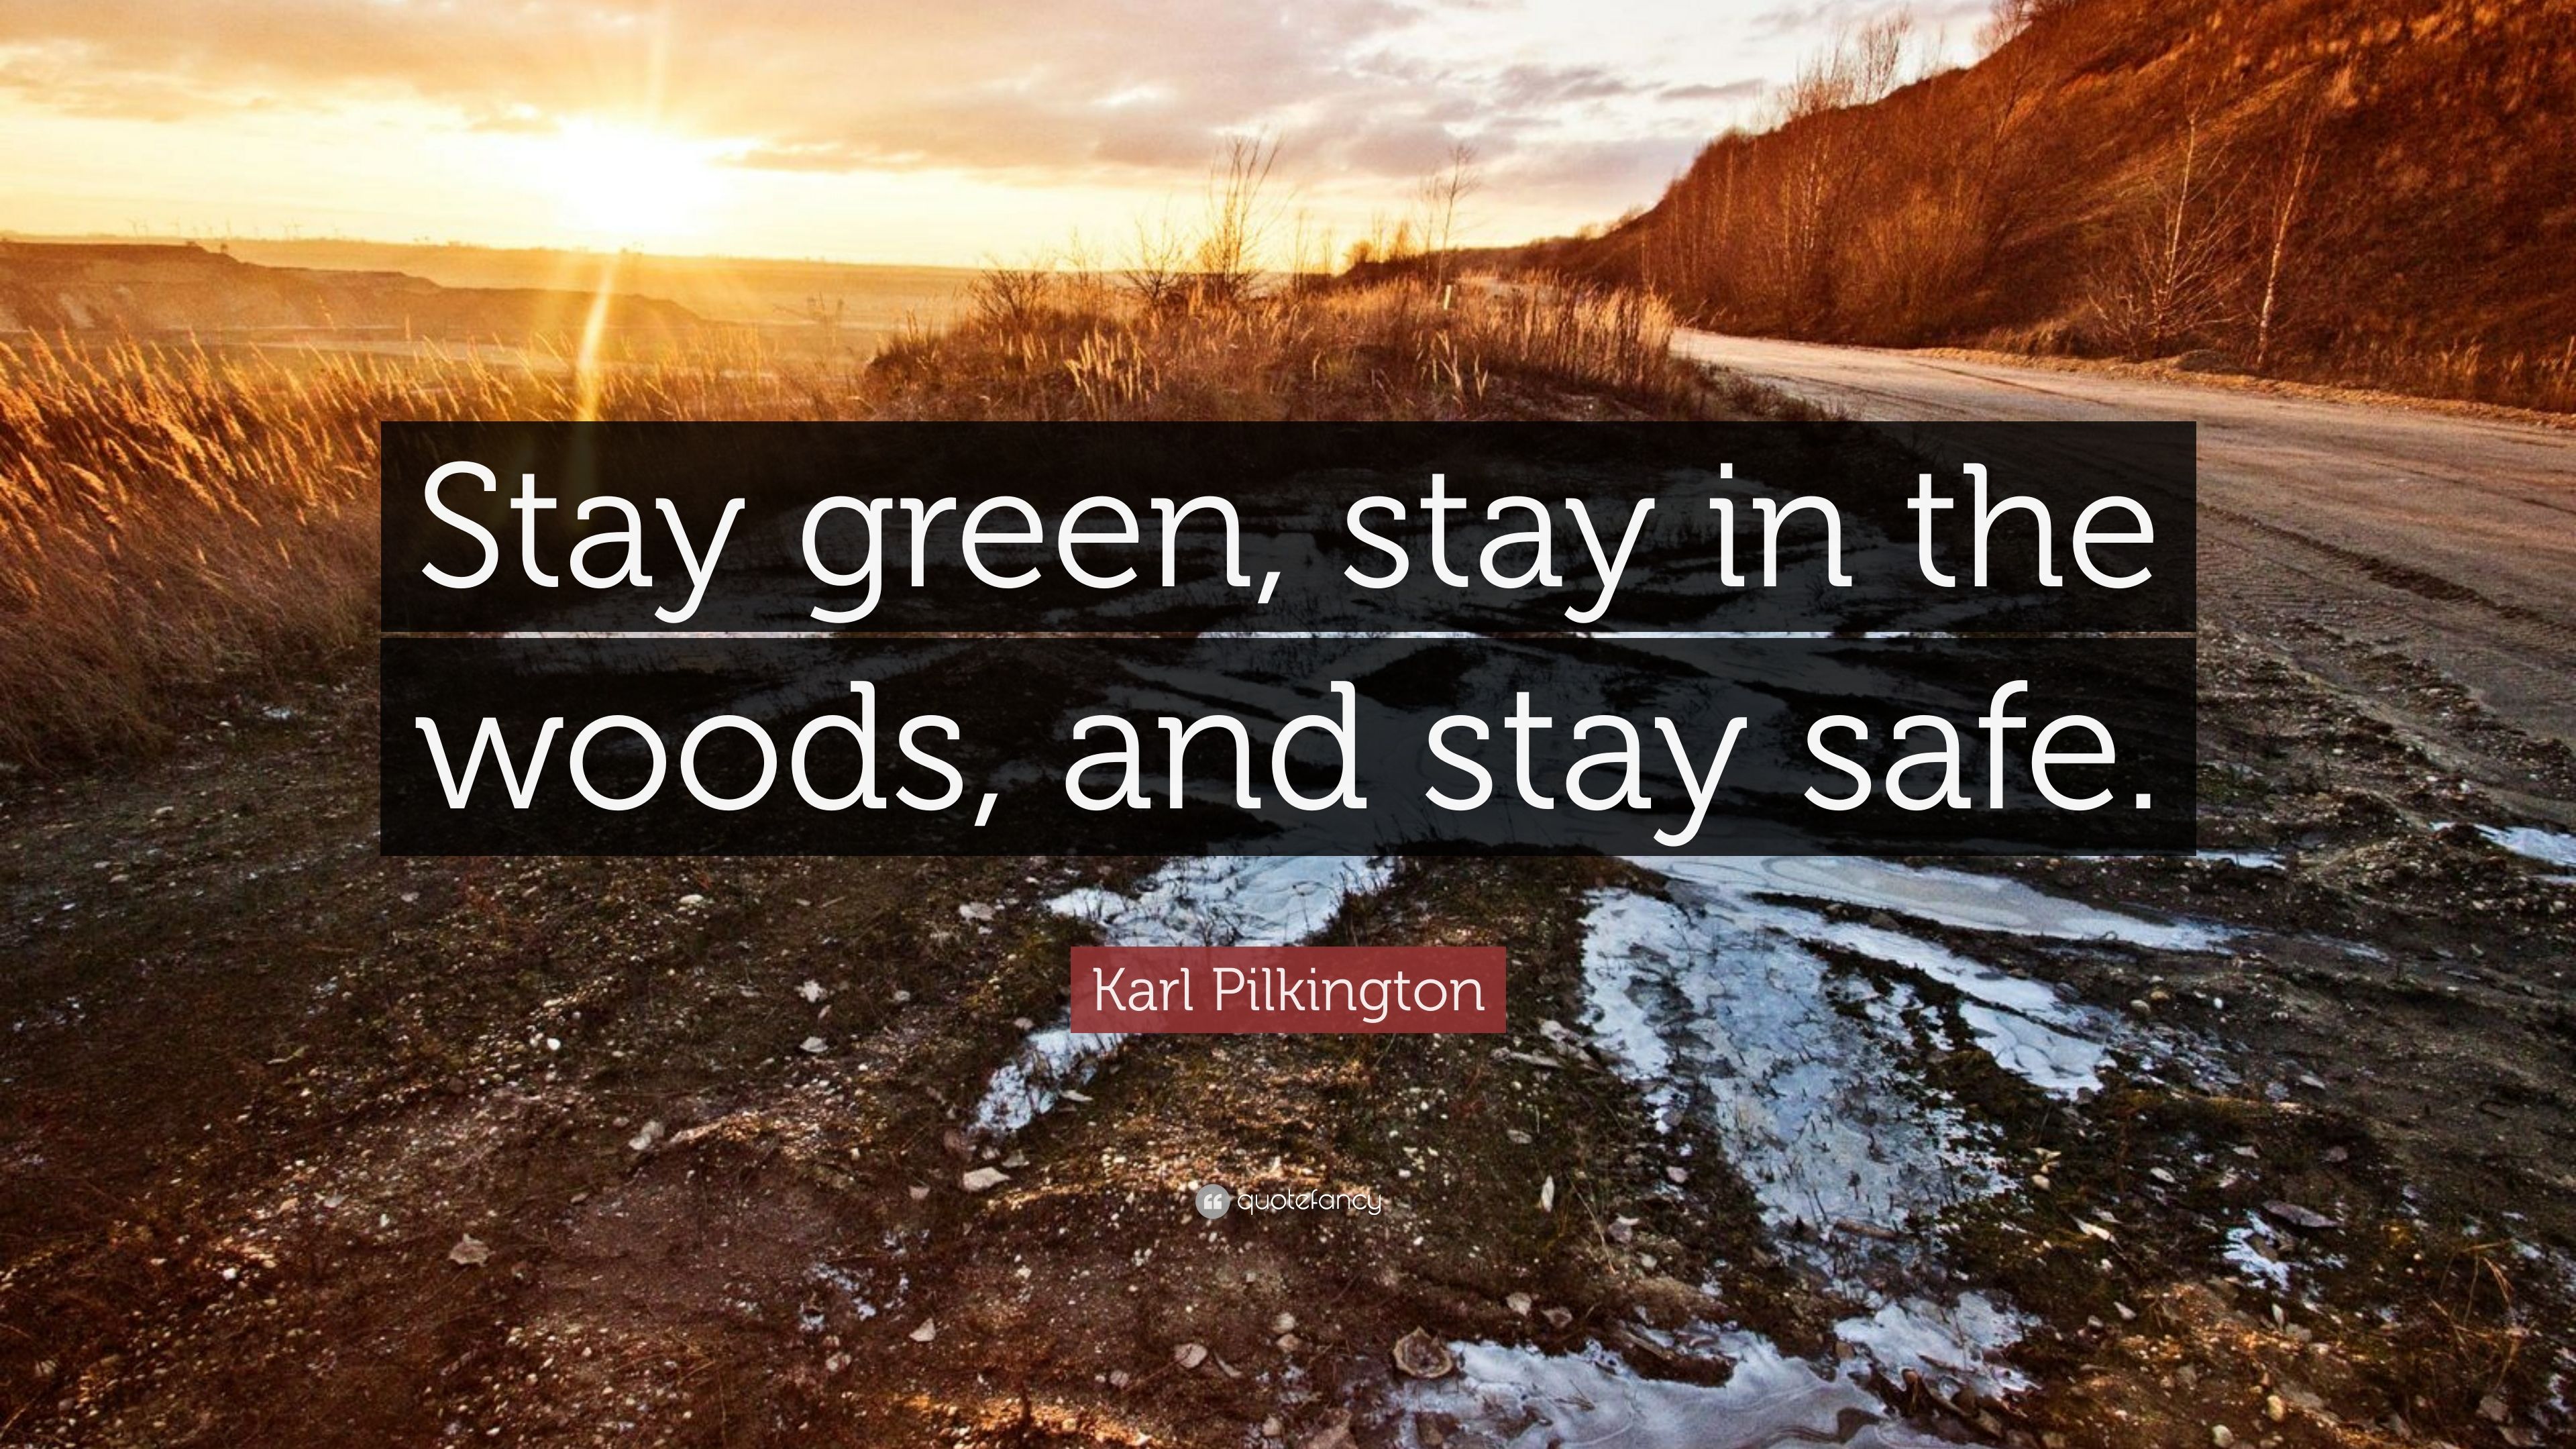 Karl Pilkington Quote: “Stay green, stay in the woods, and stay